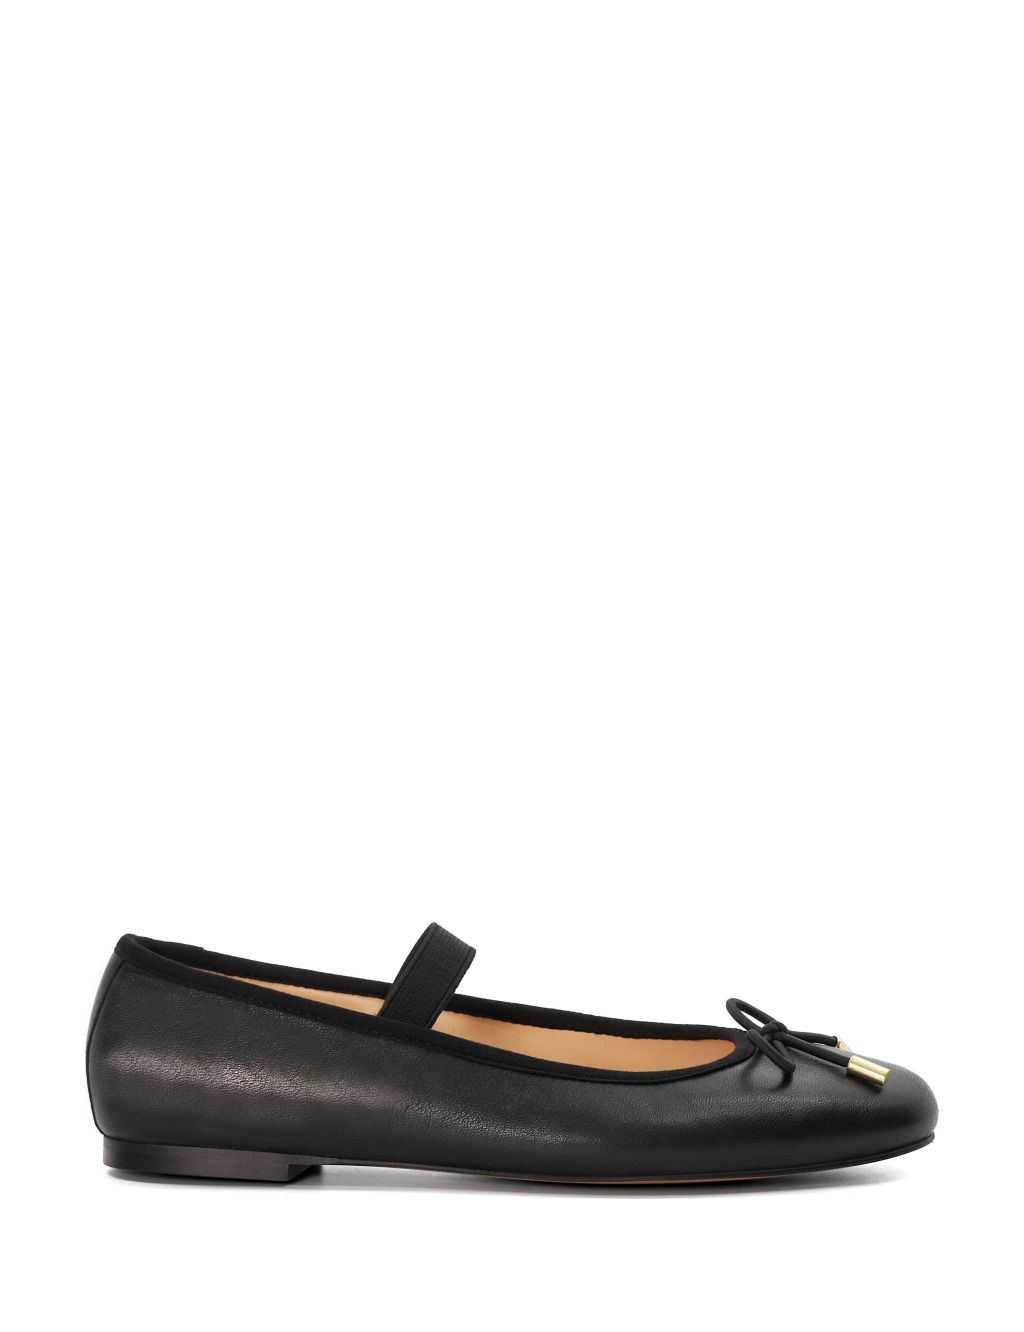 Leather Bow Flat Ballet Pumps 3 of 5